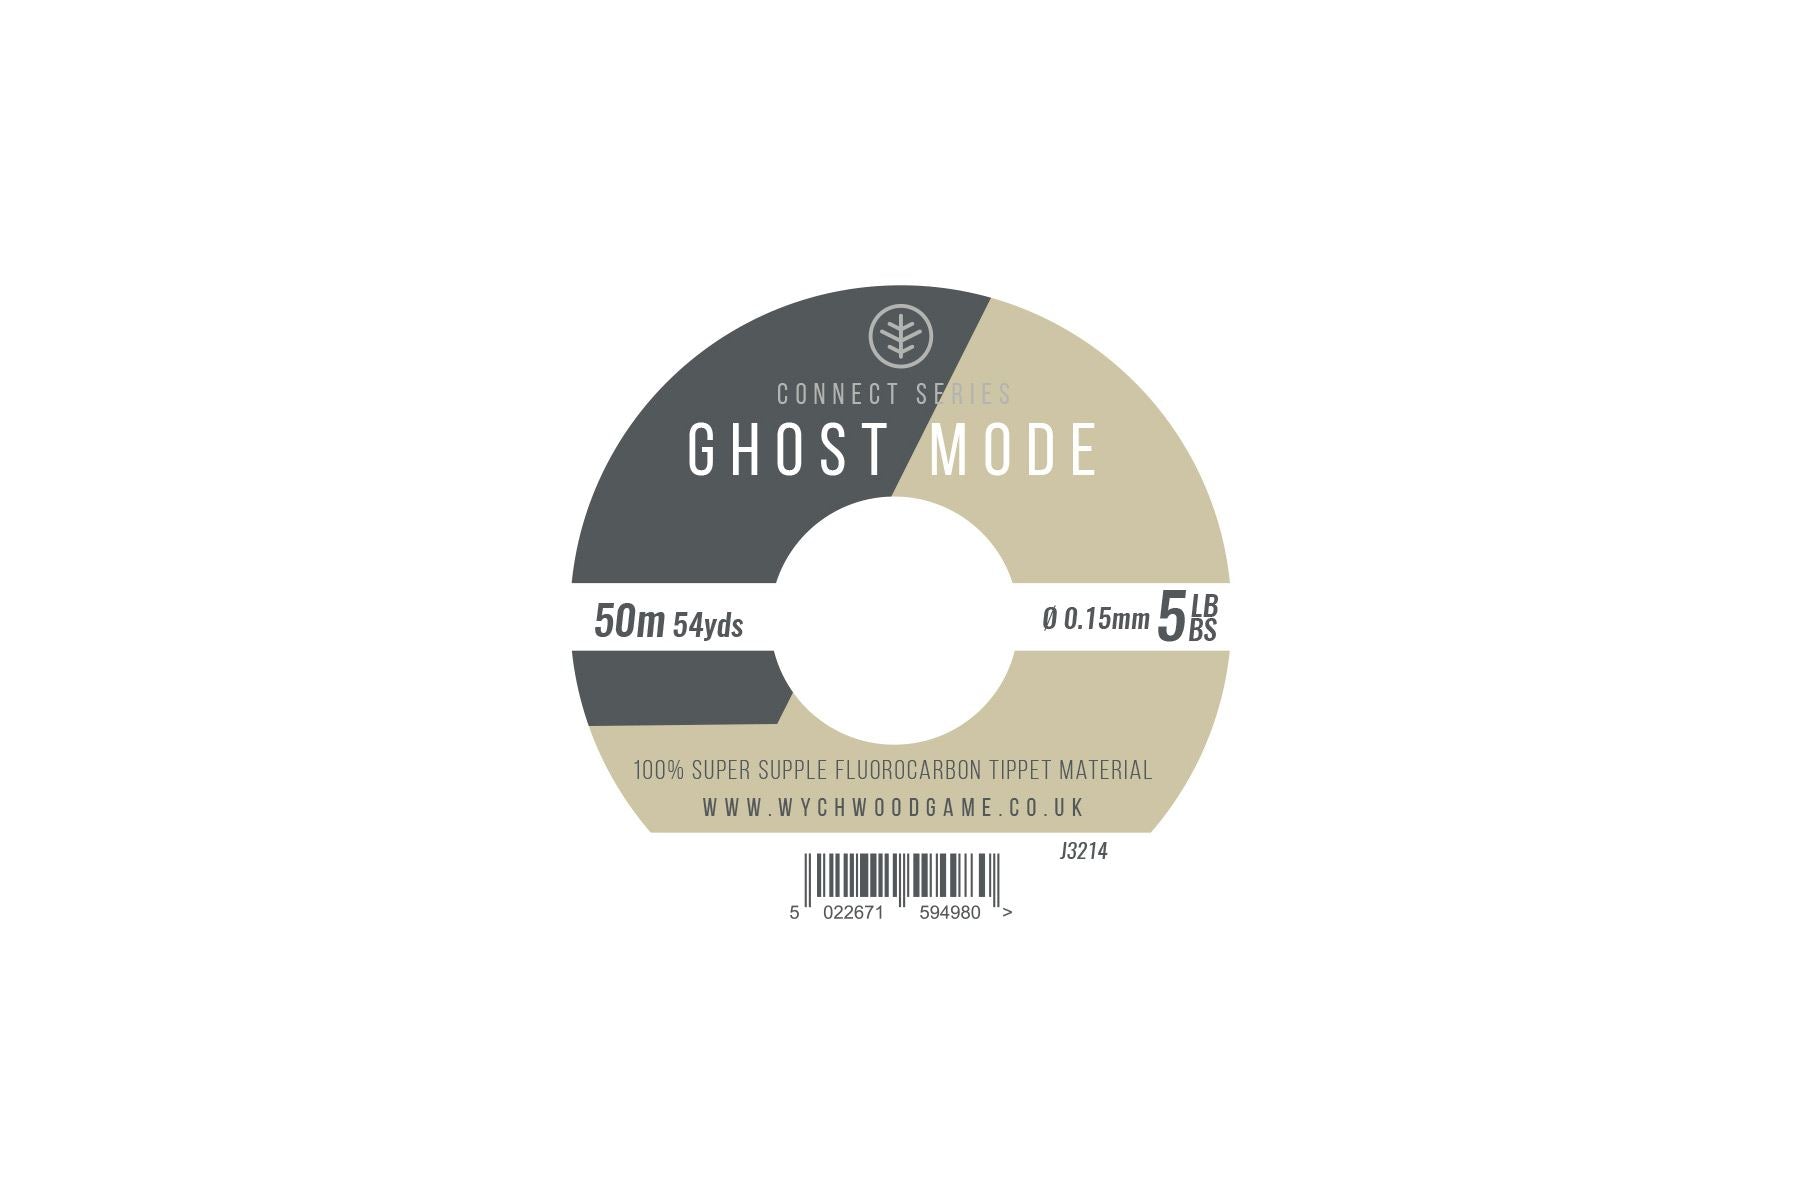 Wychwood Ghost Mode Fluorocarbon 50m Tippet 5lb